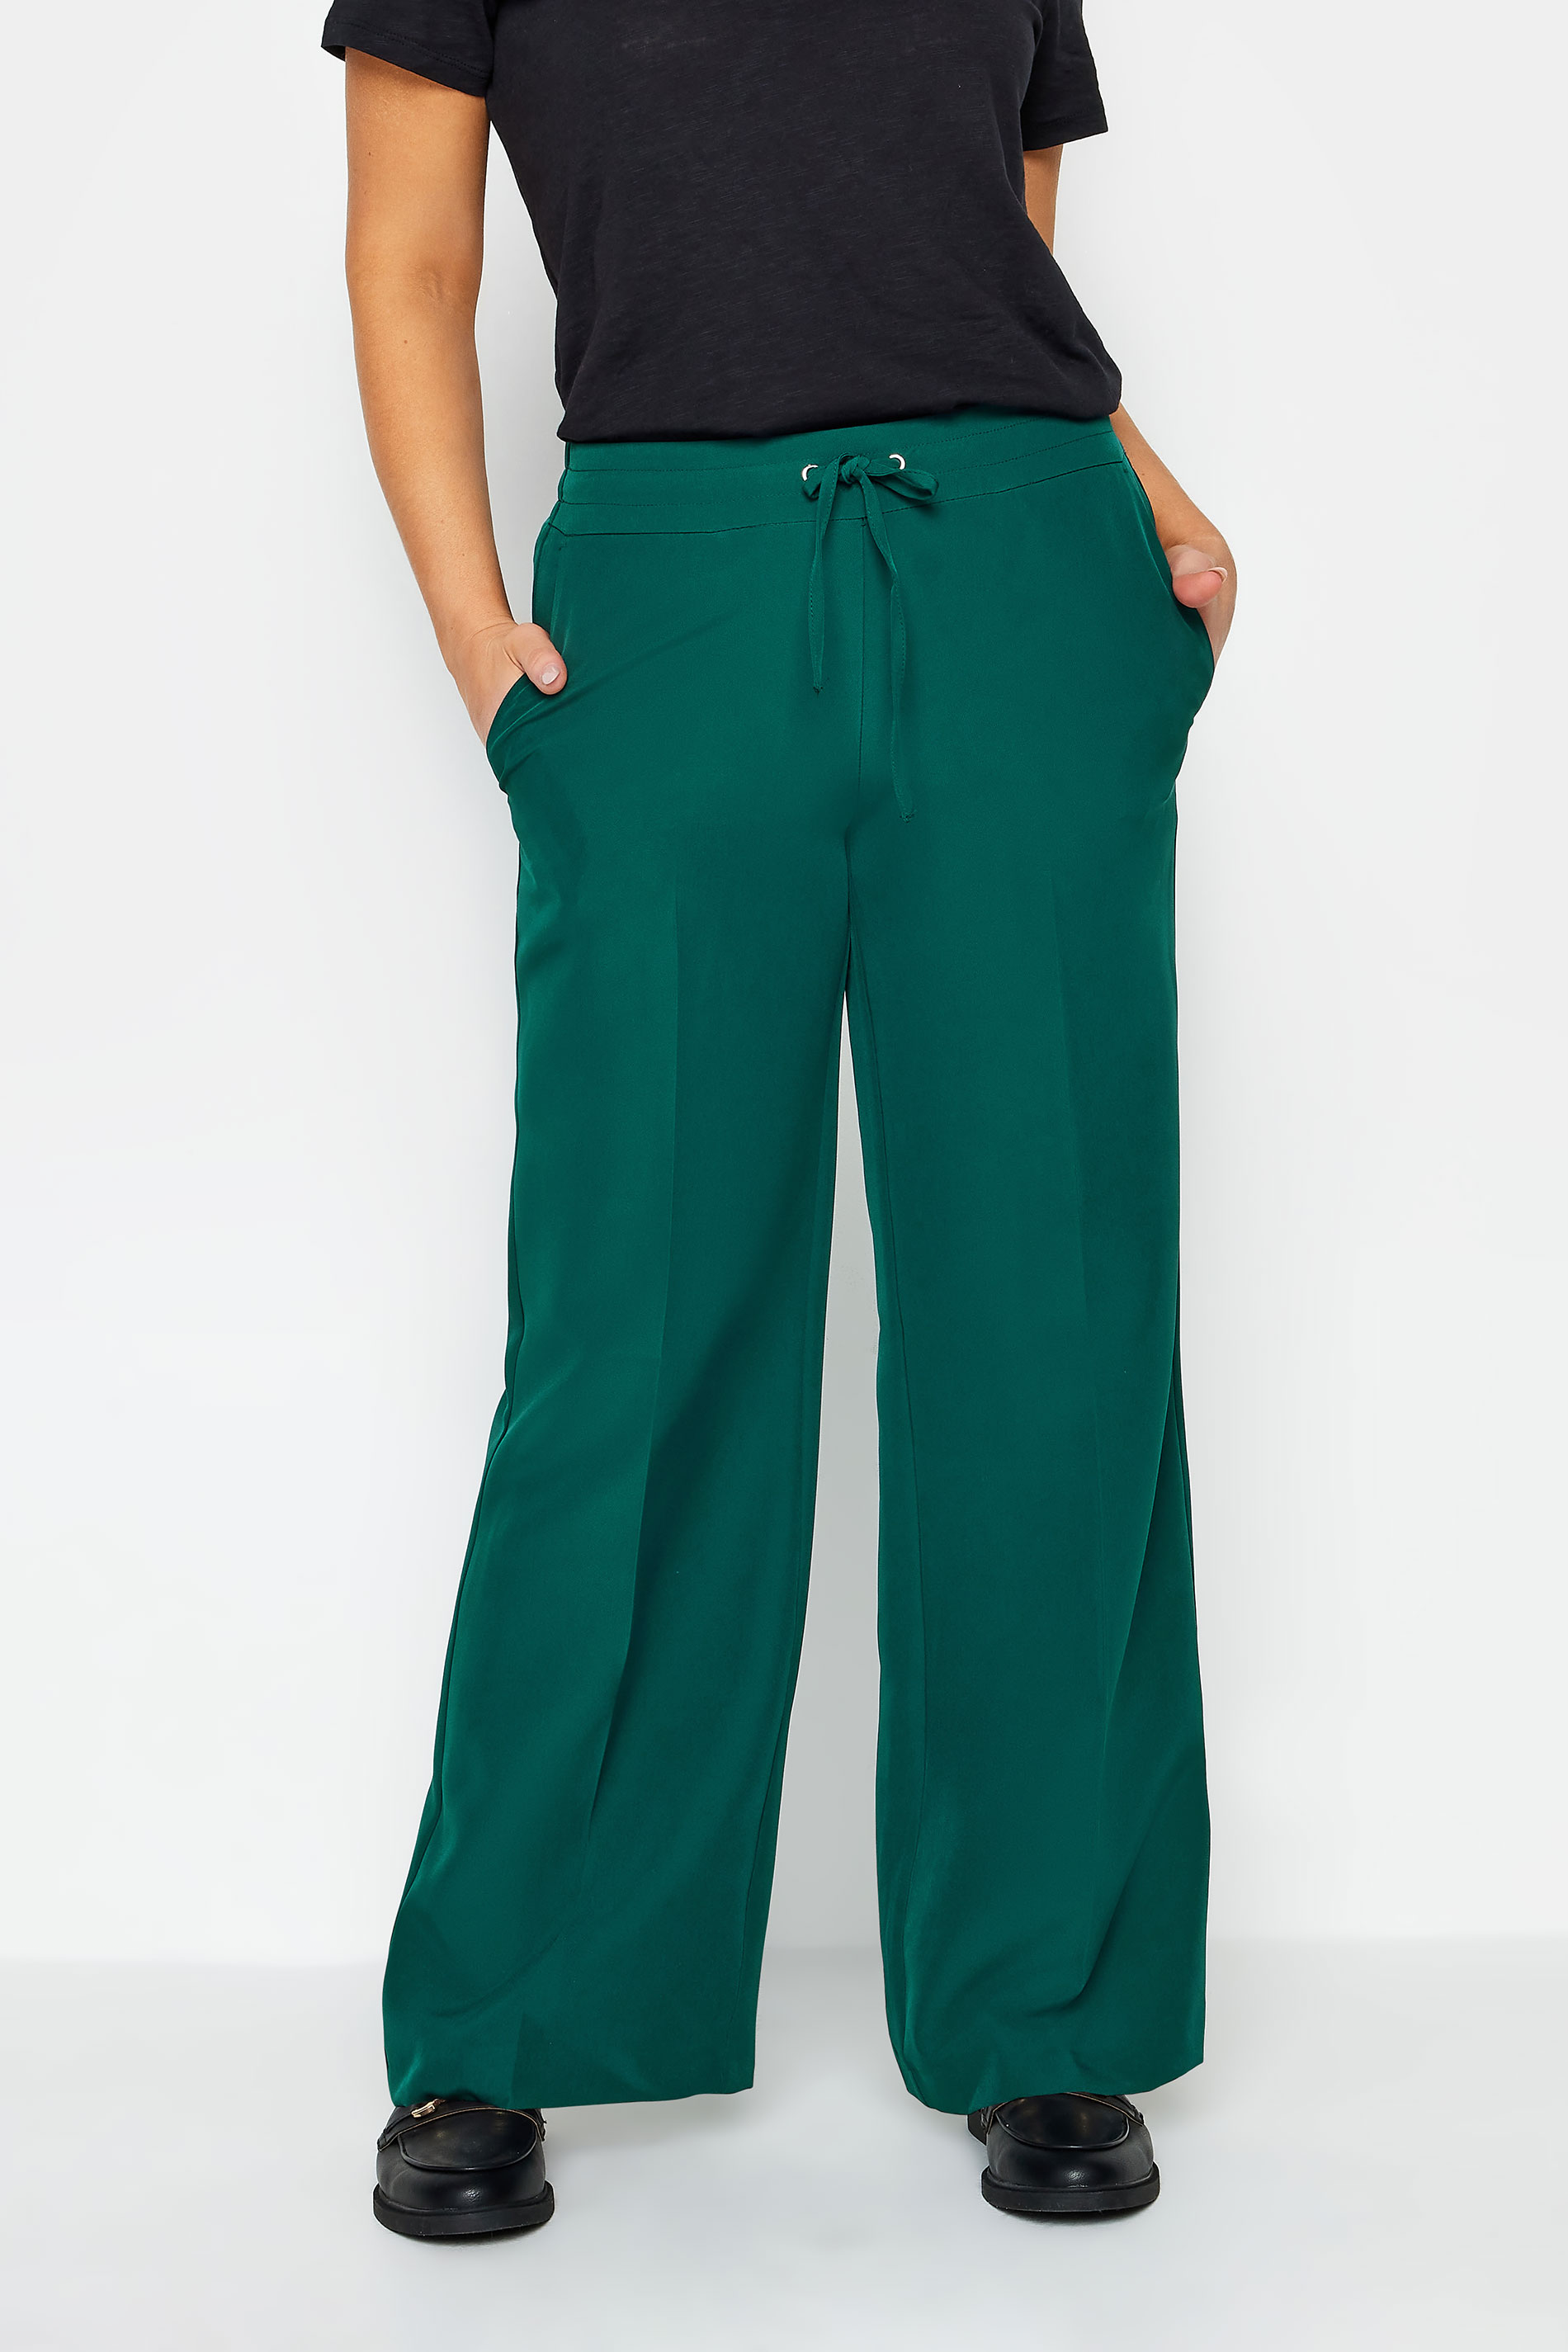 M&Co Teal Green Crepe Wide Leg Tousers | M&Co 1